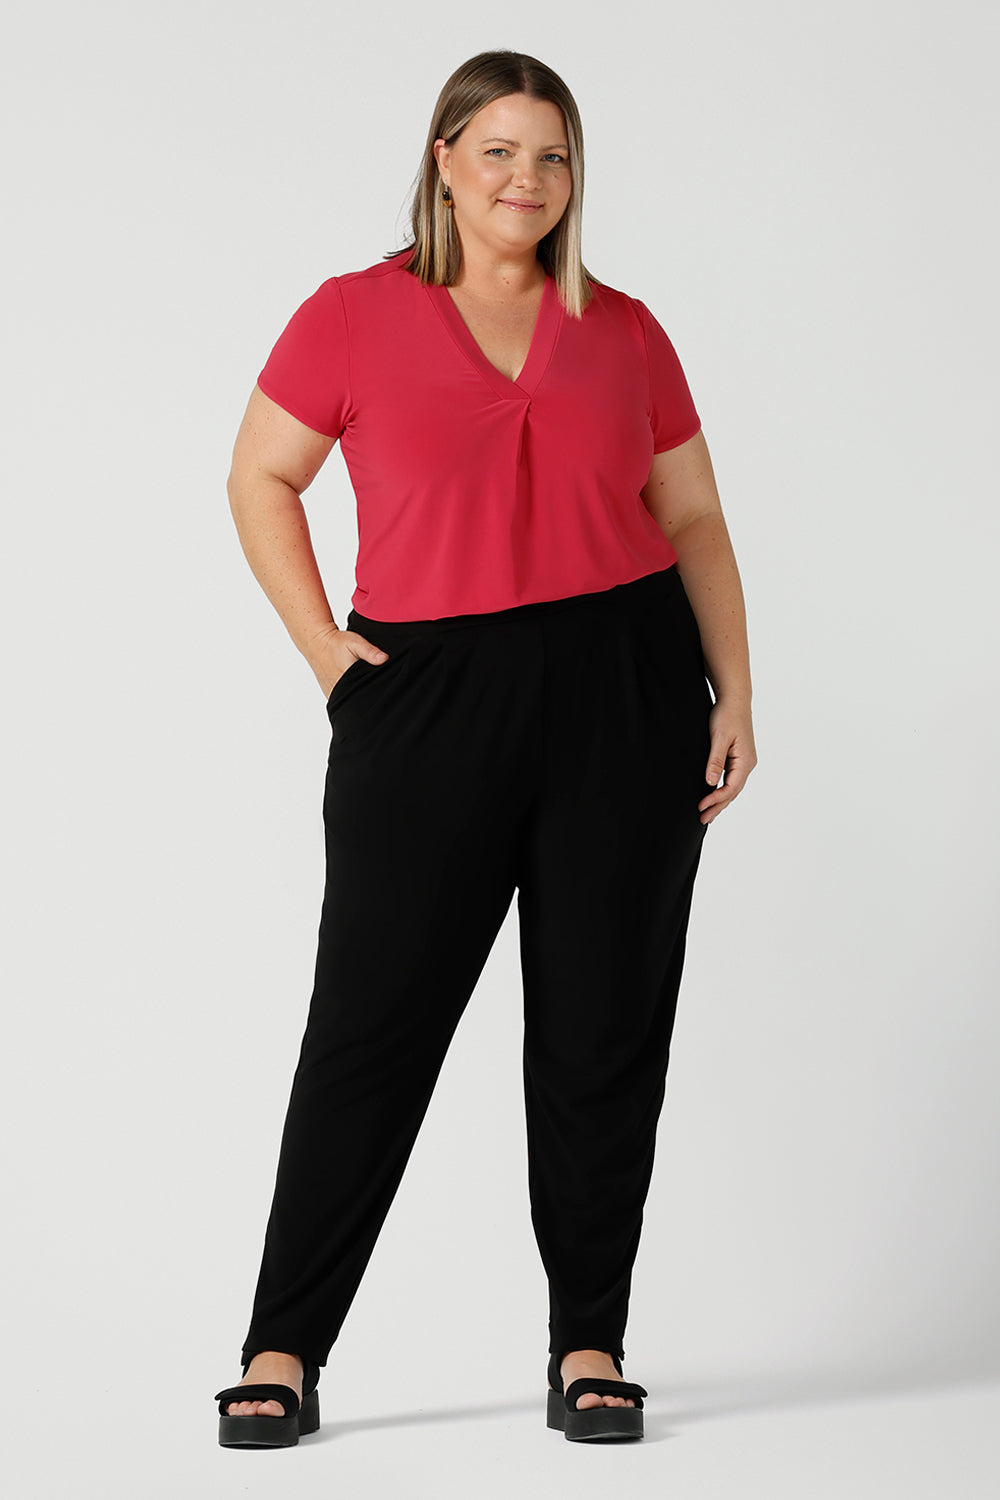 Curvy size 18 woman wears jersey work pants in black. Styled back with a fuchsia pink v-neck top. Comfortable corporate pants for women. Designed and made in Australia for women sizes 8 - 24. 